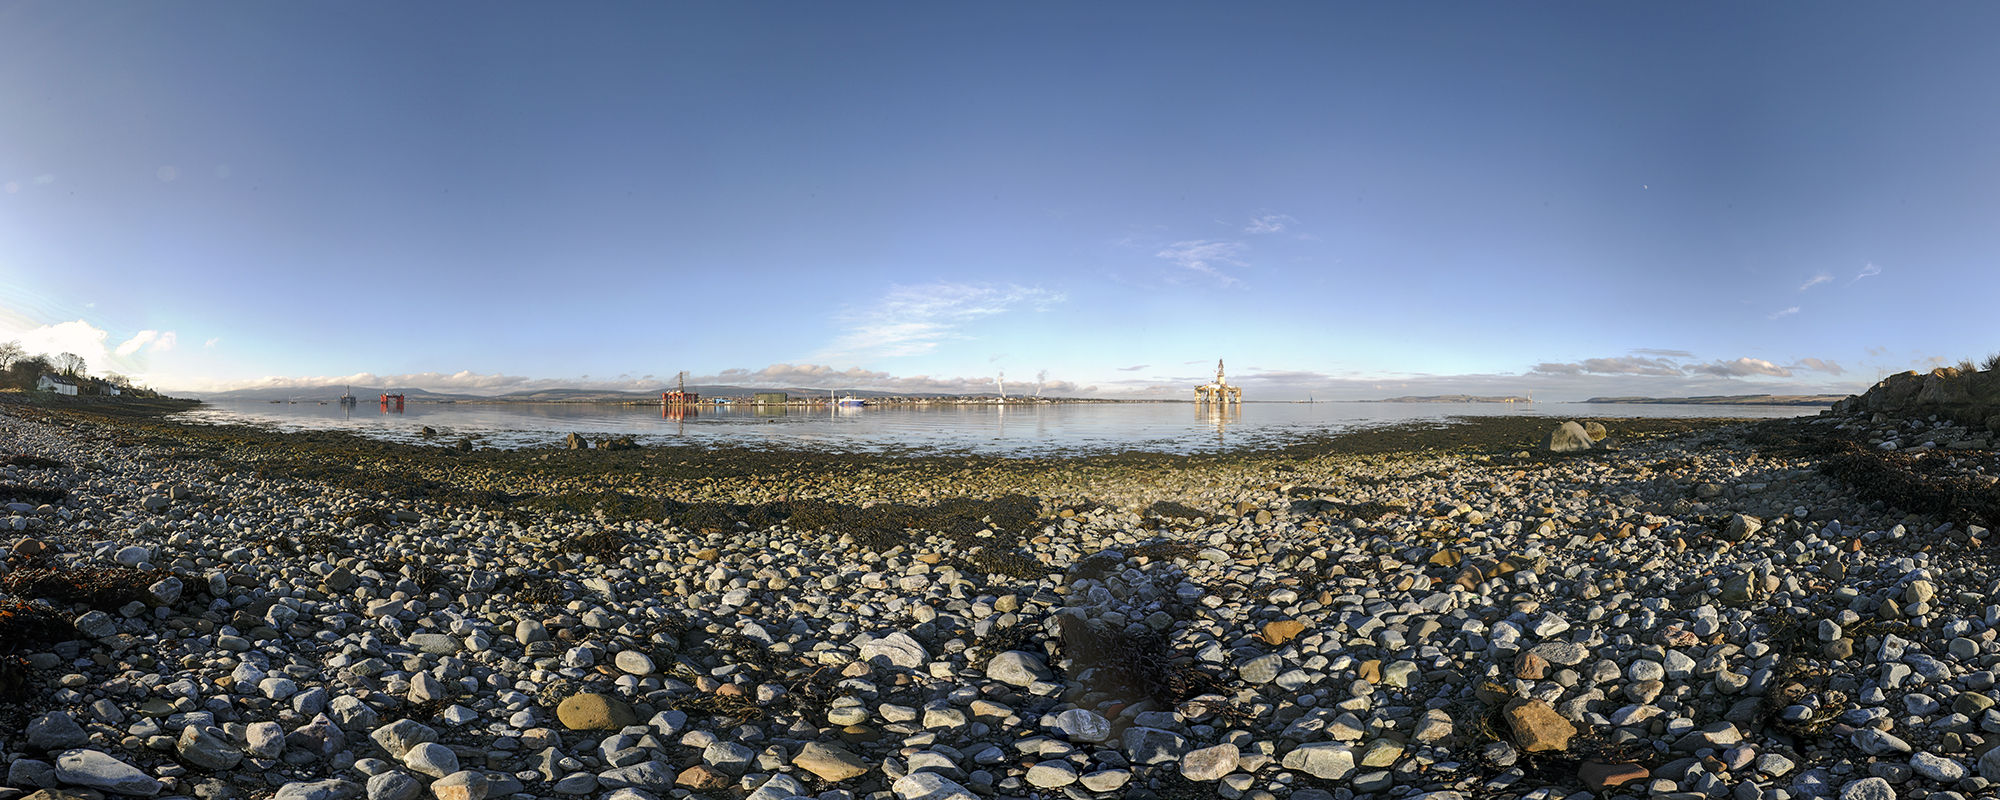 The industrial view over the Cromarty Firth.